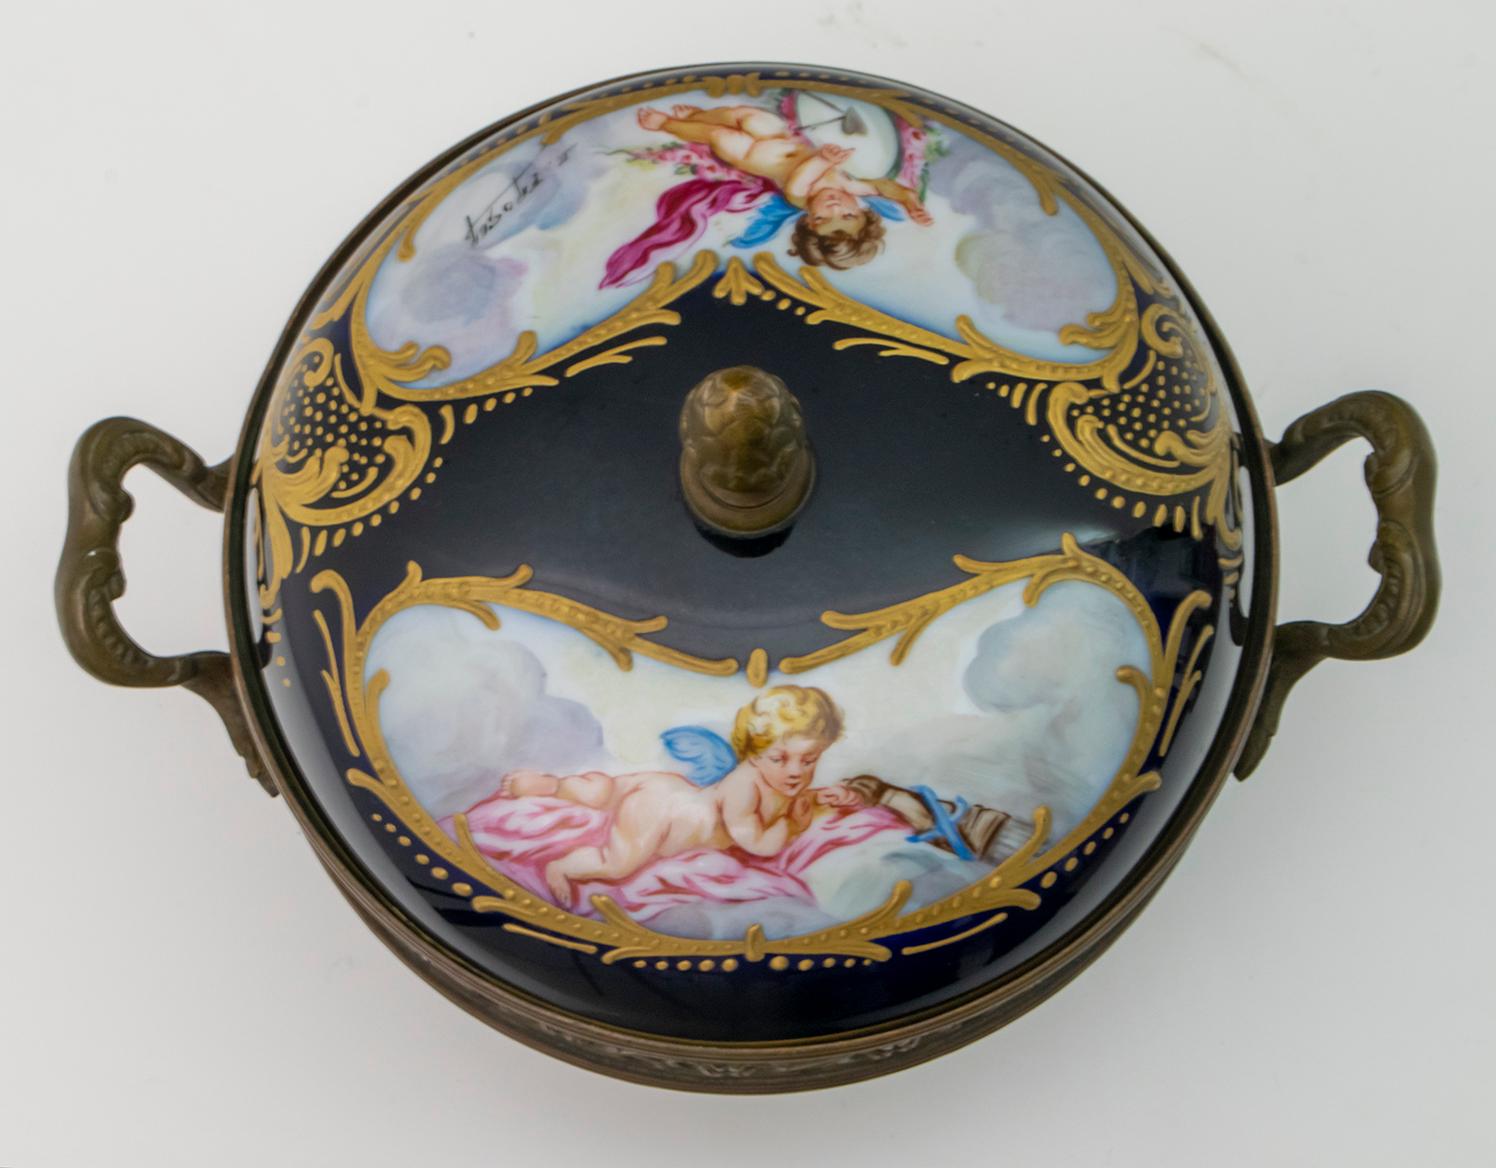 Signed E. Froger 19th Century French Porcelain Potpourri by Sevres, 1880 For Sale 8